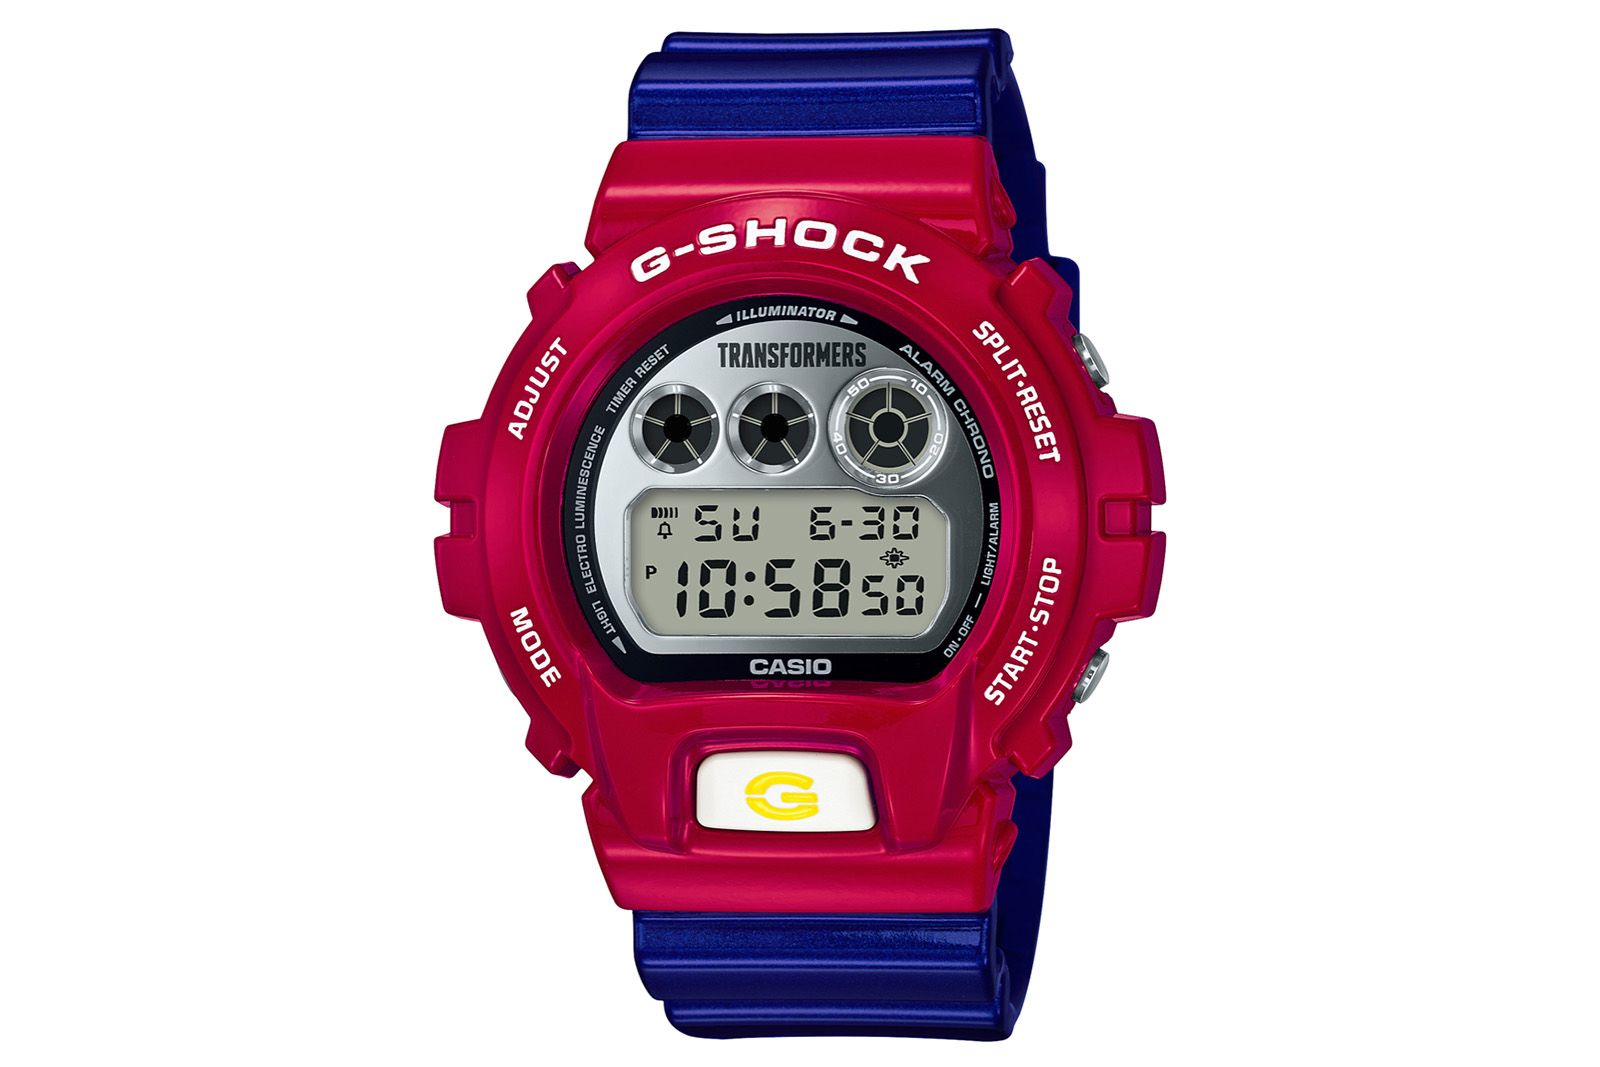 Is the Transformers G-Shock the coolest watch ever?